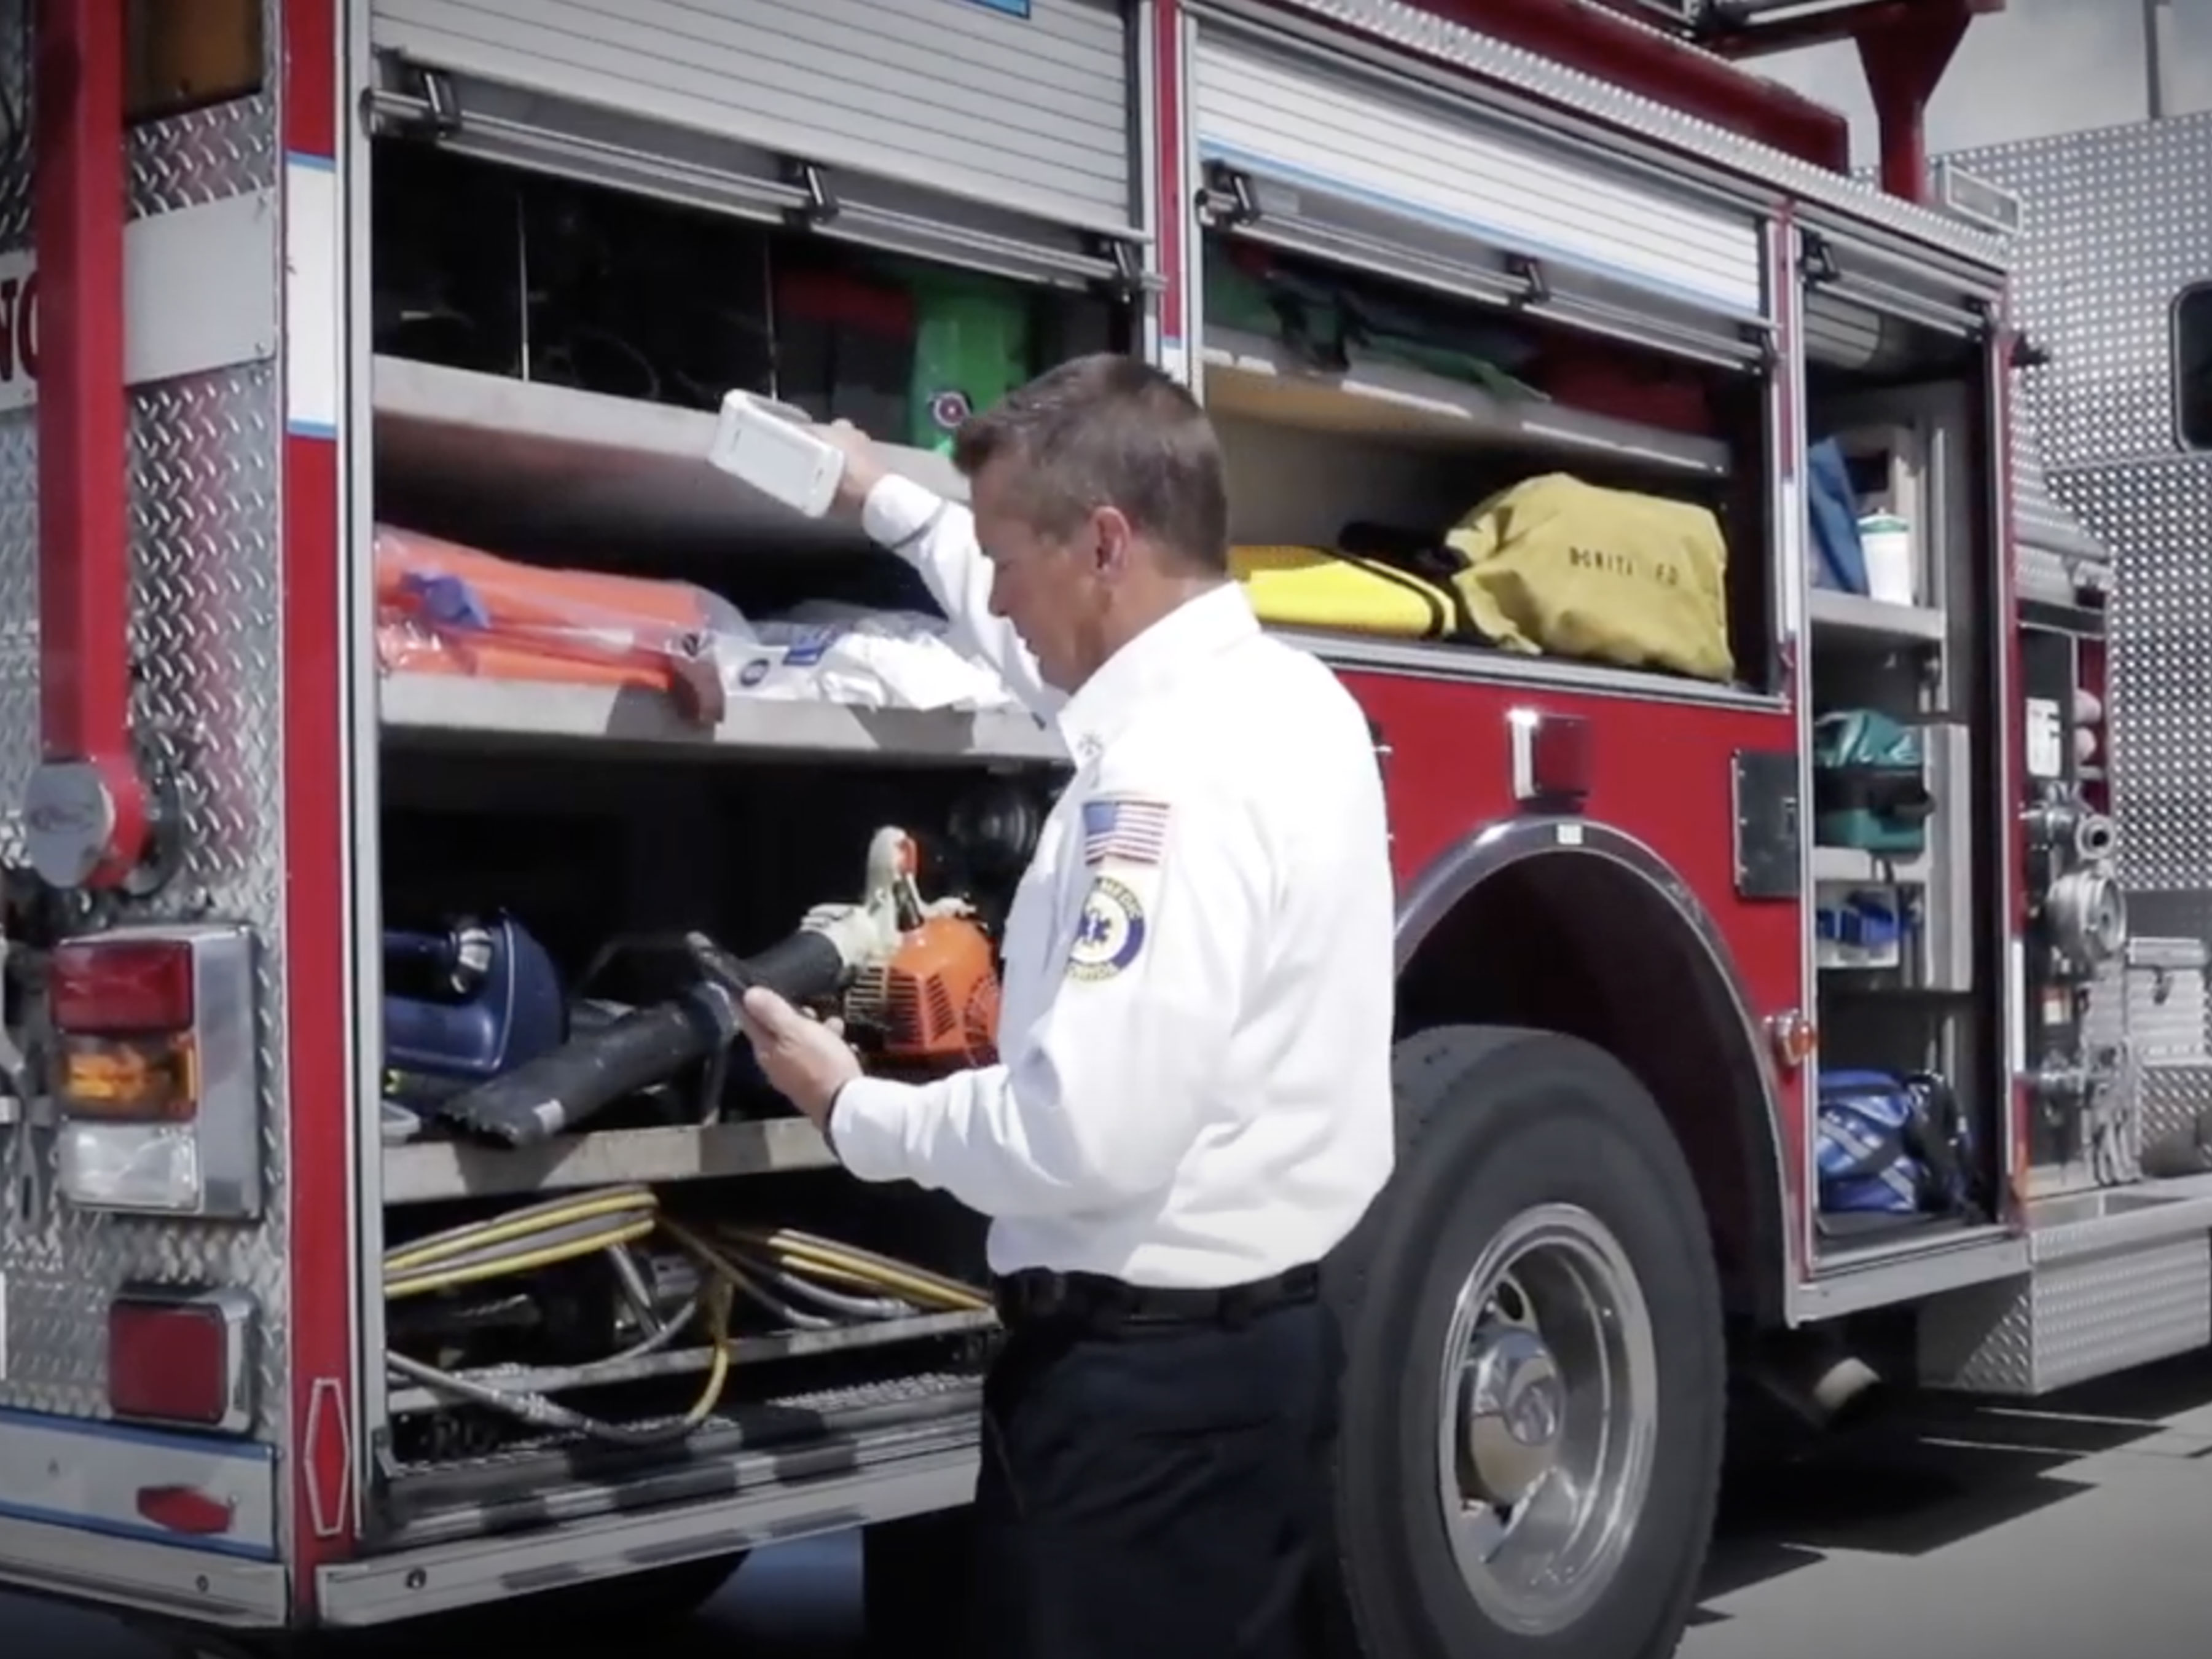 Fireman arranging items in the truck